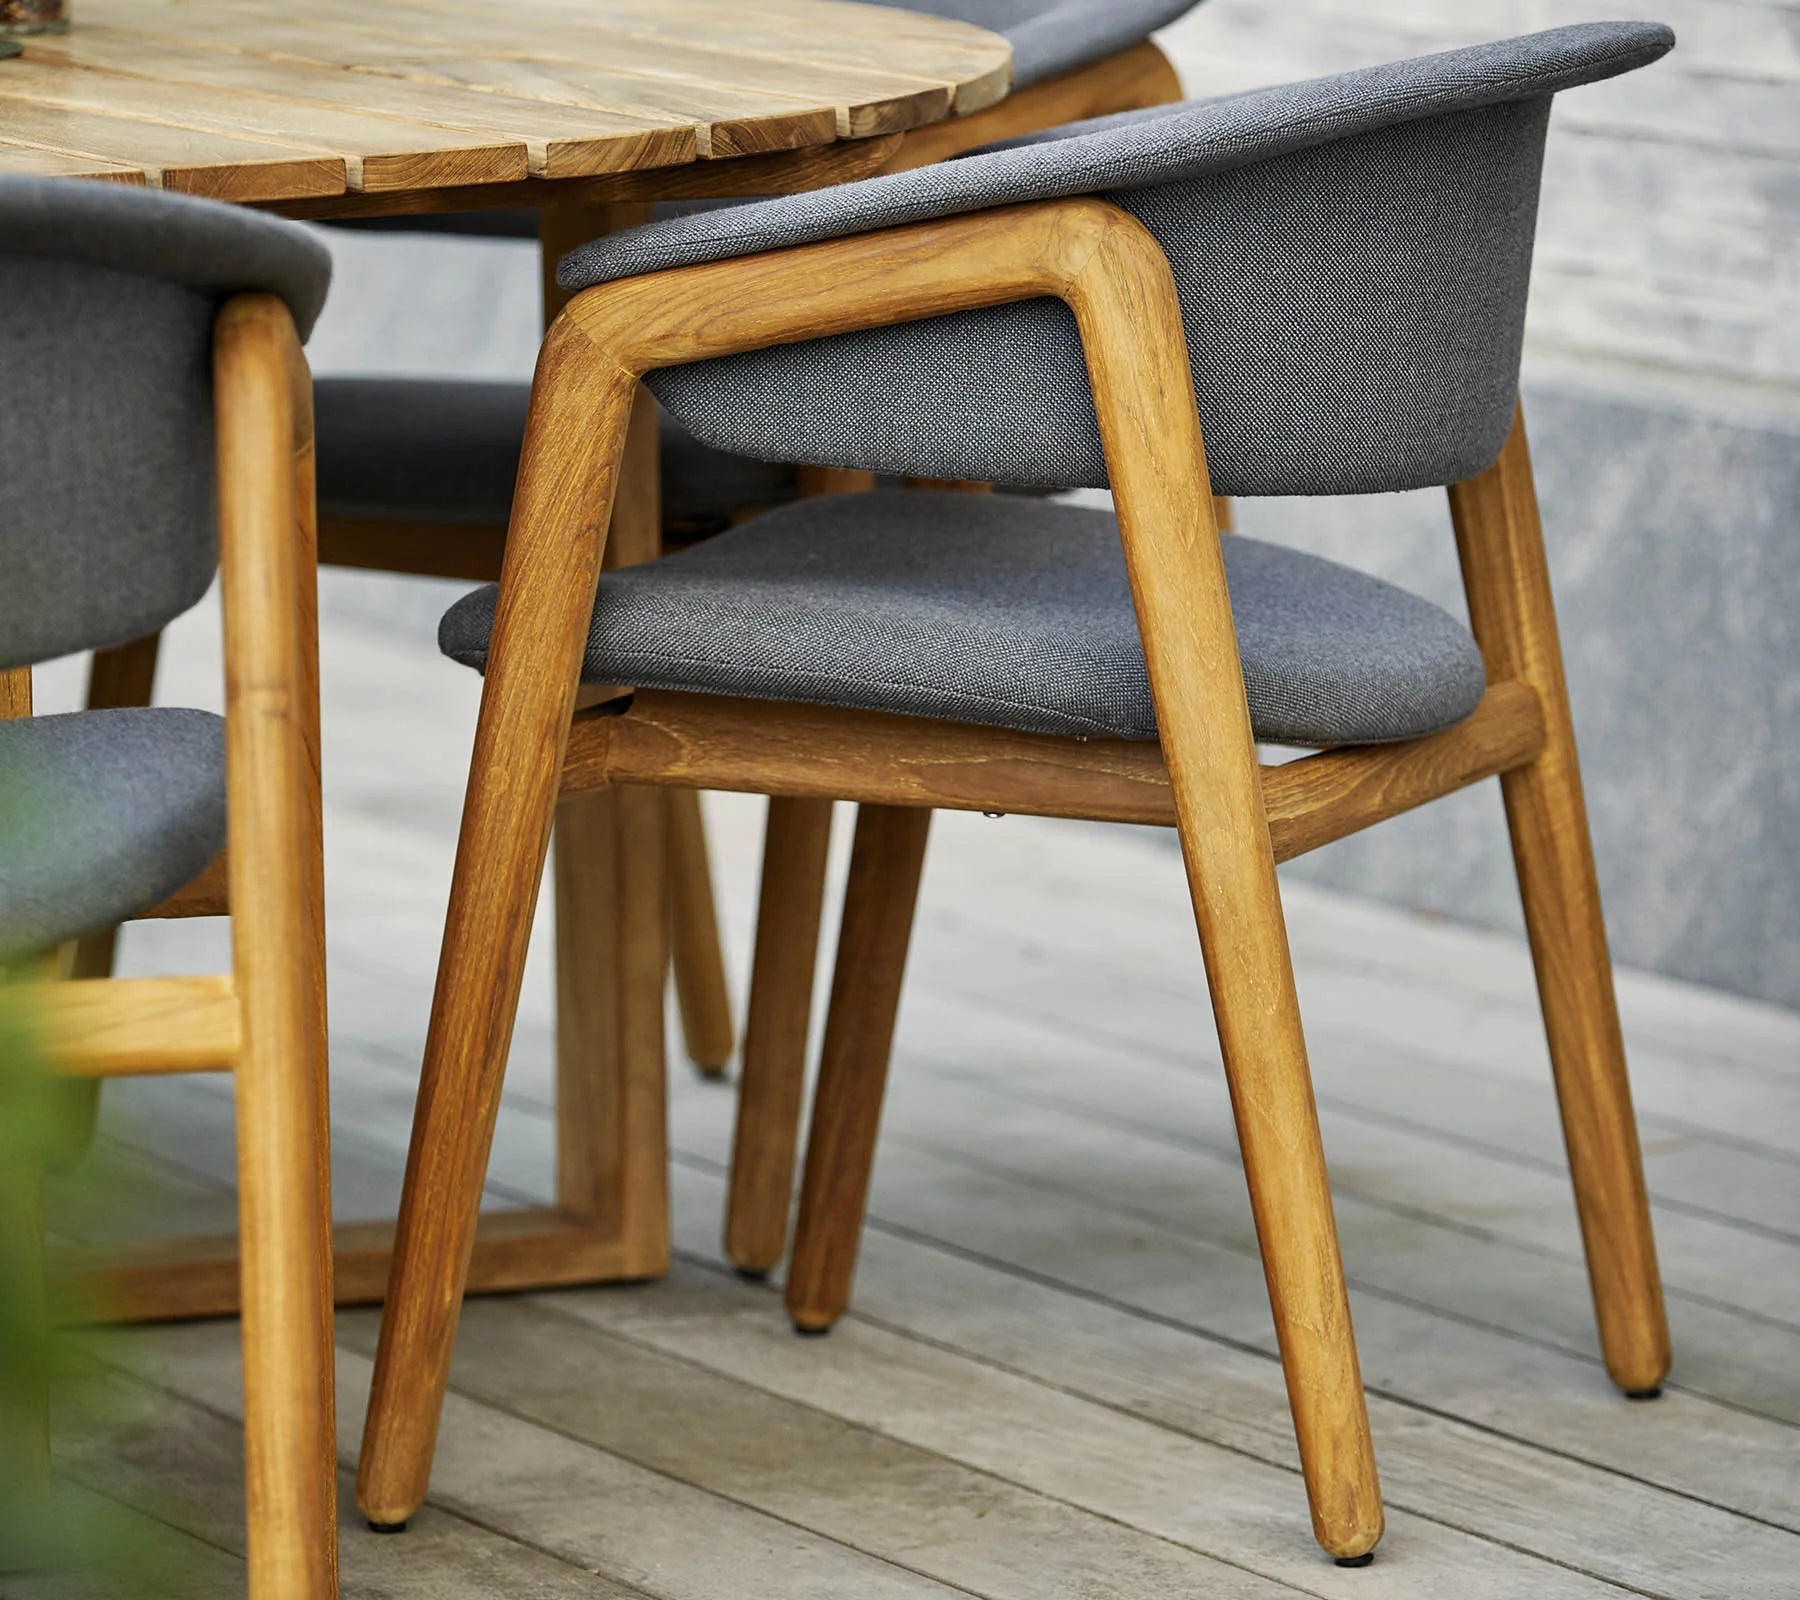 Boxhill's Luna Outdoor Dining Armchair Lifestyle image with teak round table close up view